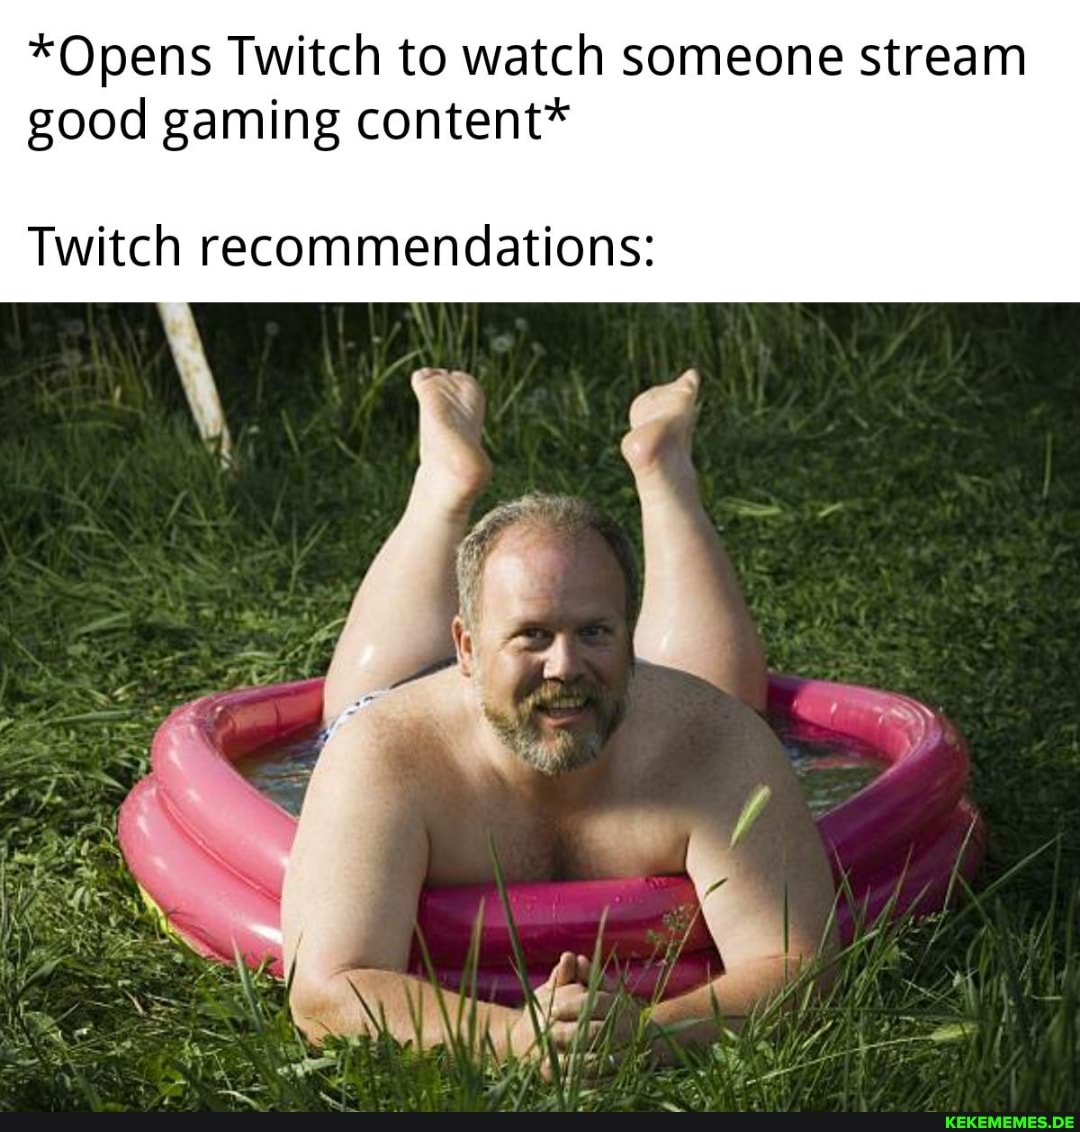 *Opens Twitch to watch someone stream good gaming content* Twitch recommendation